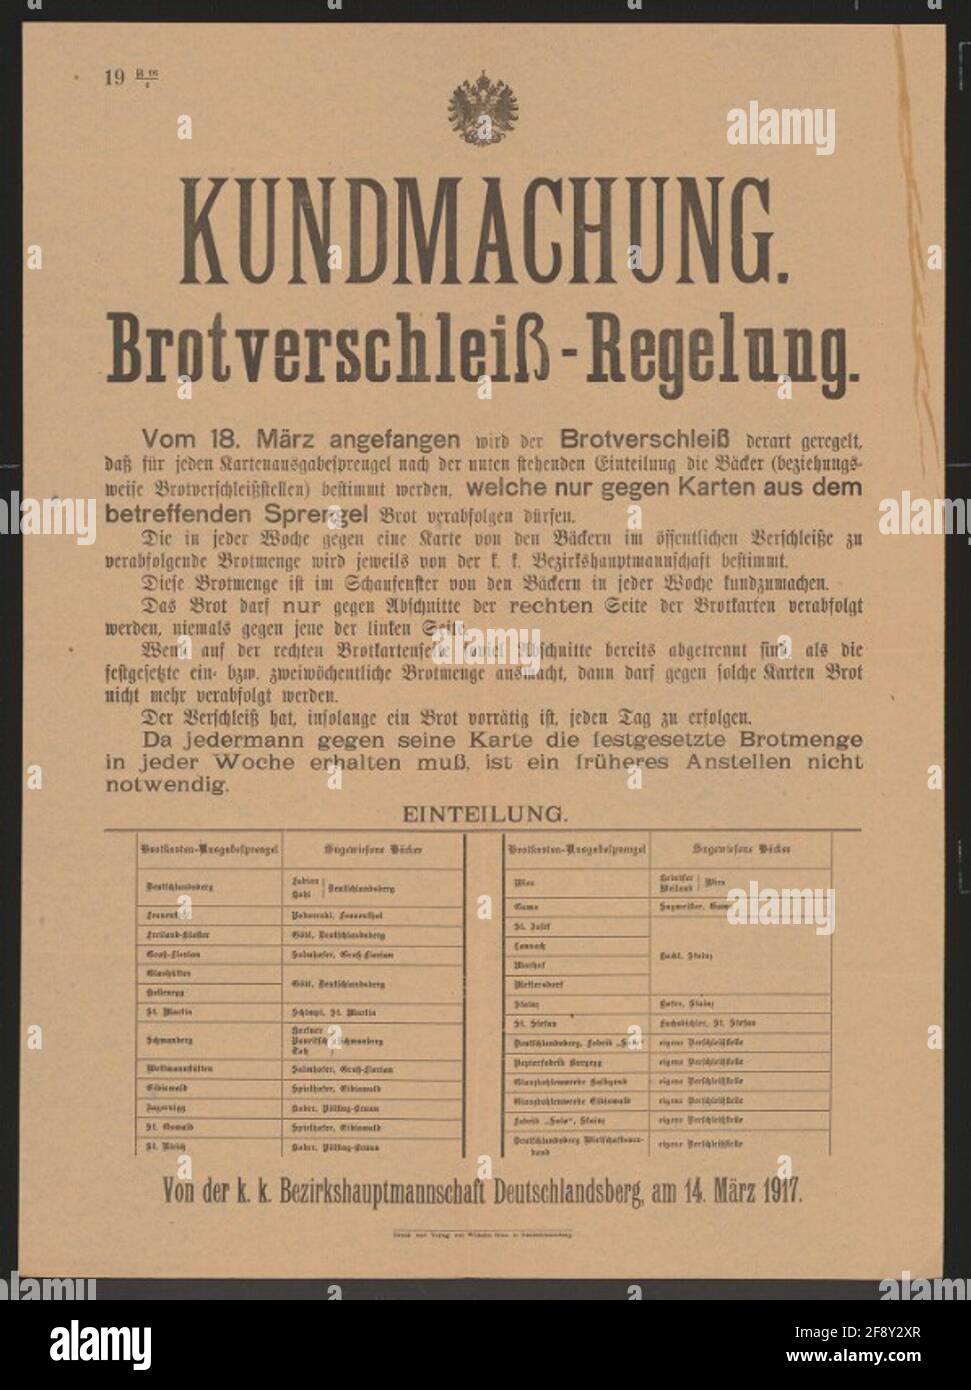 Bread wear - announcement - Deutschlandsberg from 18 March New regulation of bread sale - issue only against maps from relevant blasting - Collection of the division of the sprendel - Details and provisions for handling, issuing and validity of the ID card - K.K. District Hauptmannschaft Deutschlandsberg, on 14 March 1917 - 19 B 16/1 Stock Photo